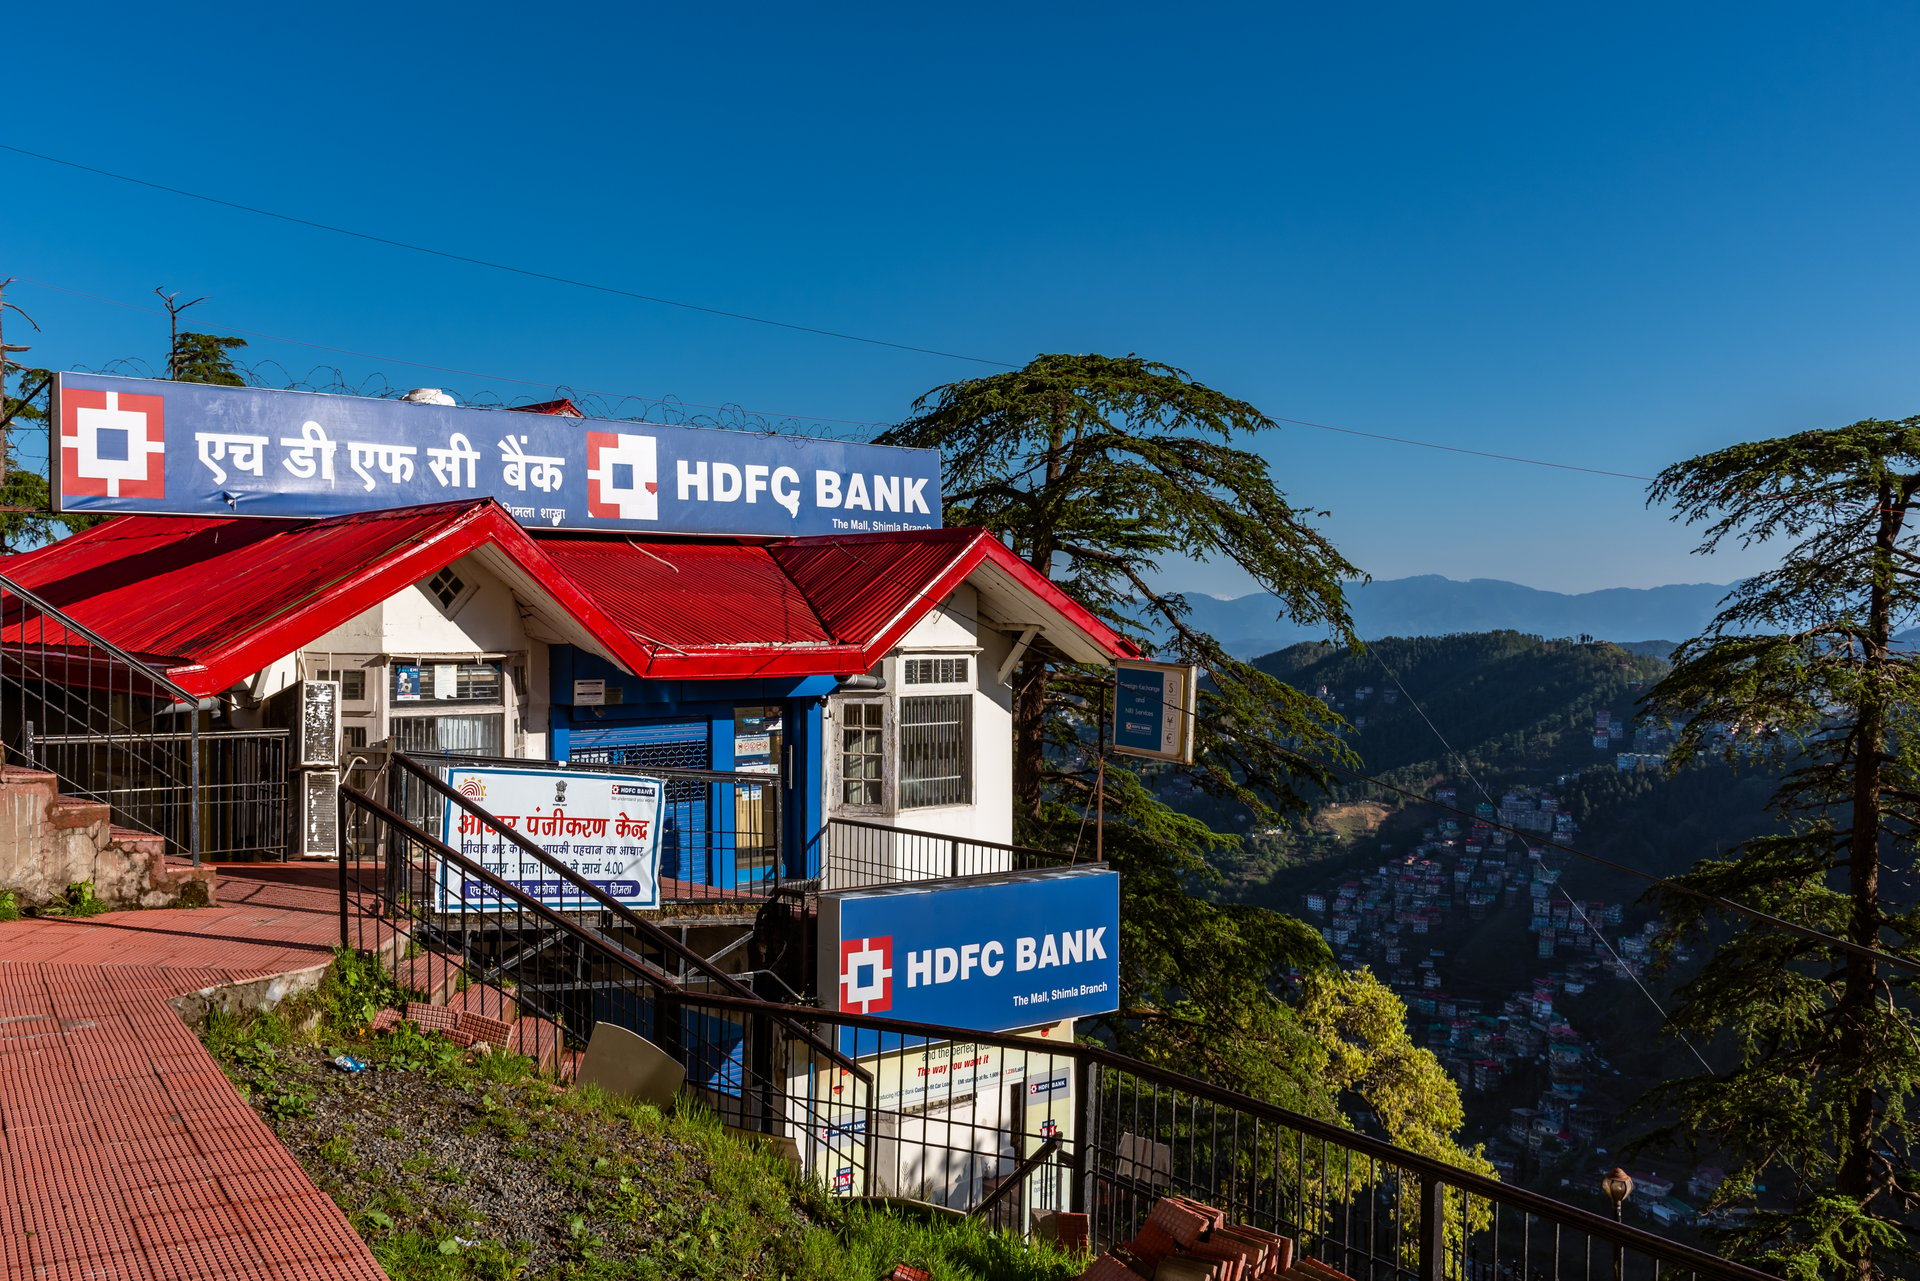 A branch of HDFC Bank sitting in the side of a green valley.